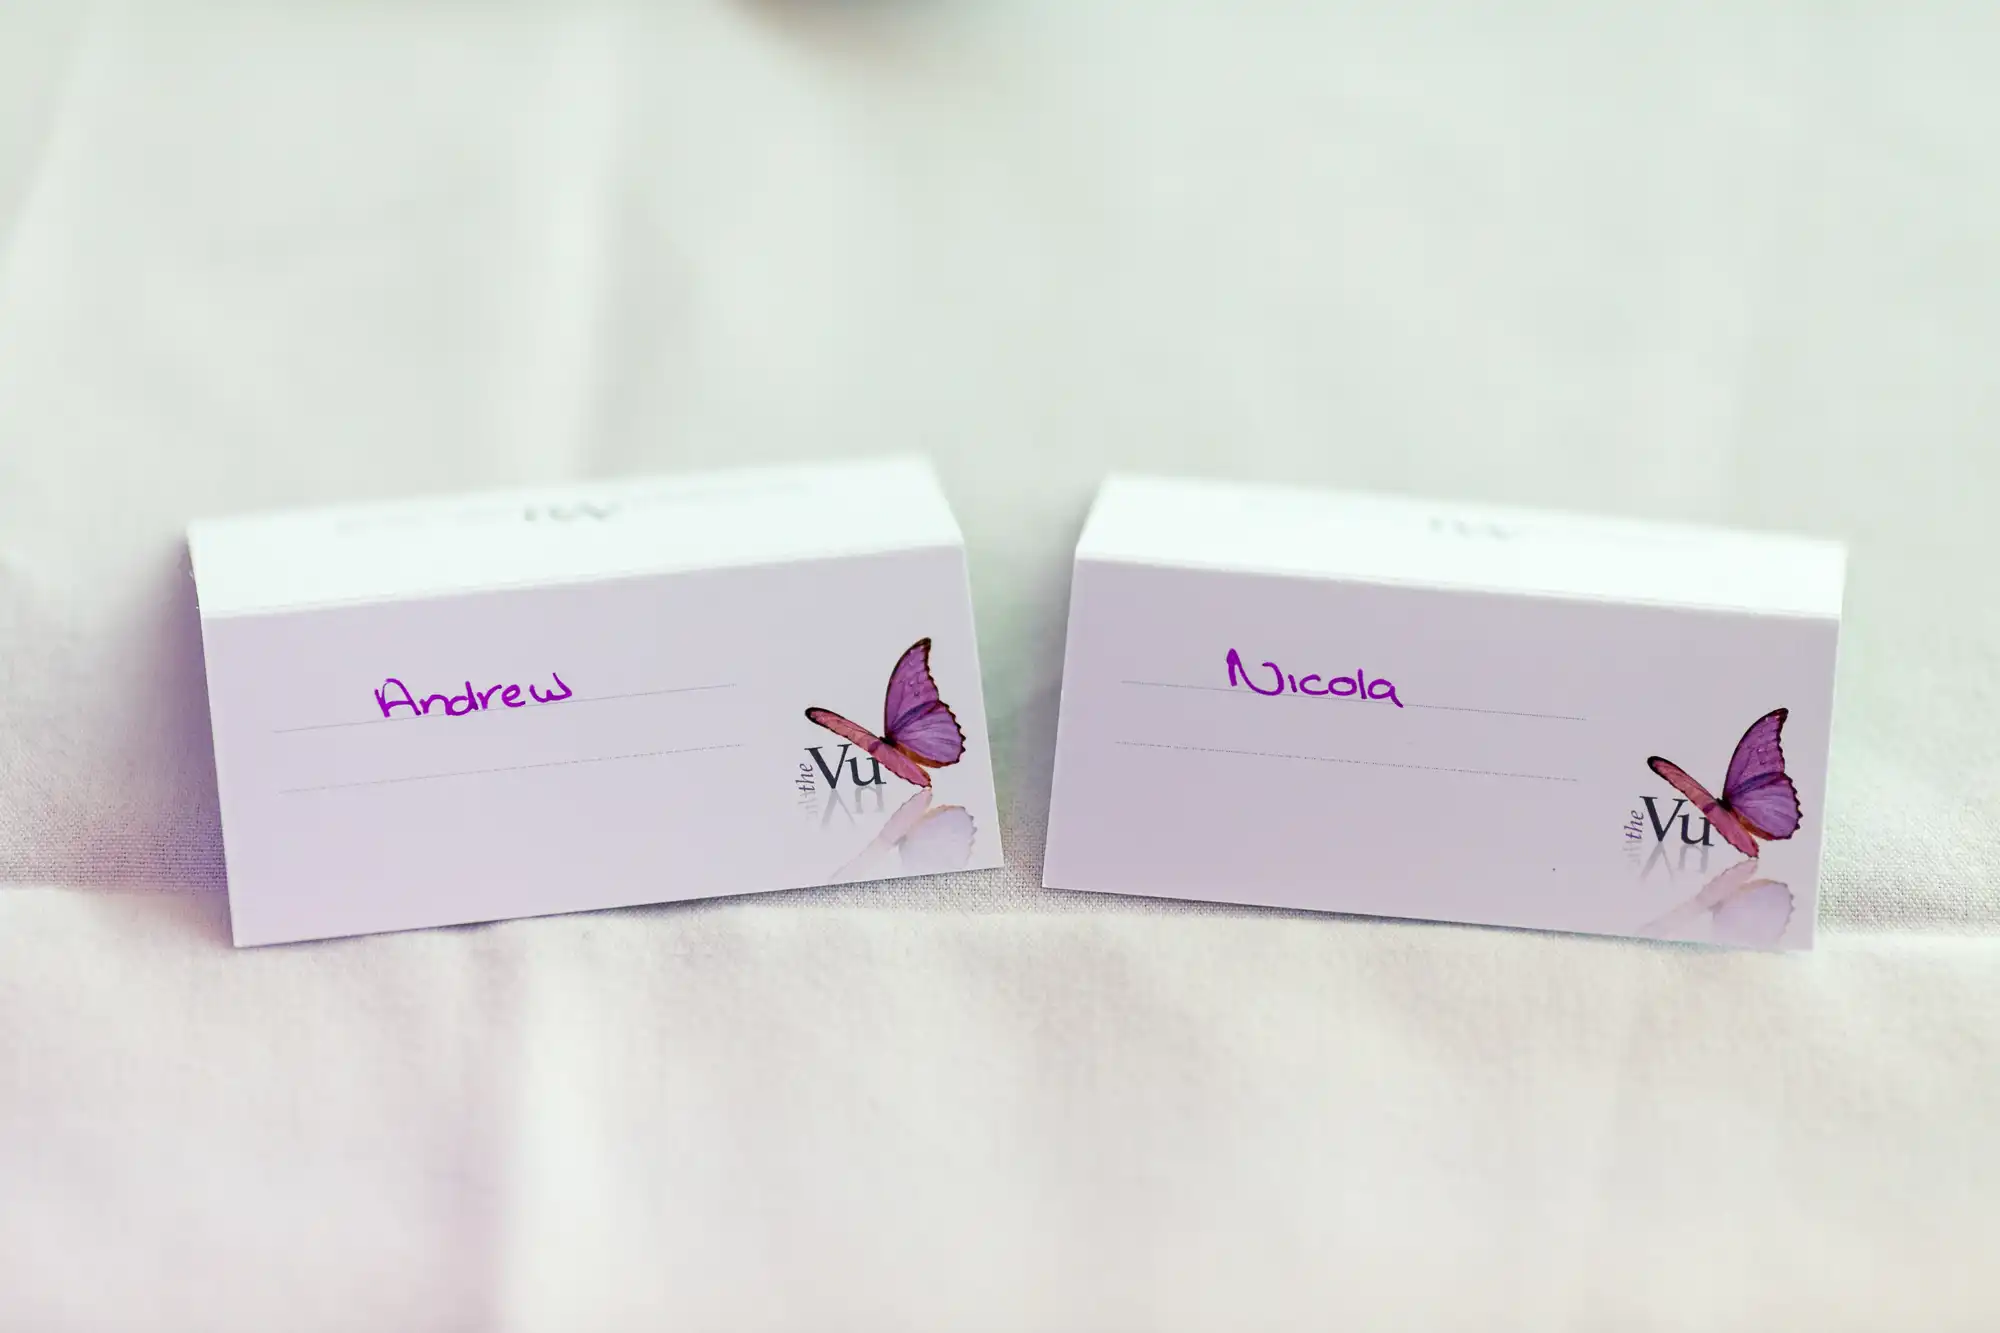 Two place cards reading "andrew" and "nicola" with purple butterfly designs, set on a white linen tablecloth.